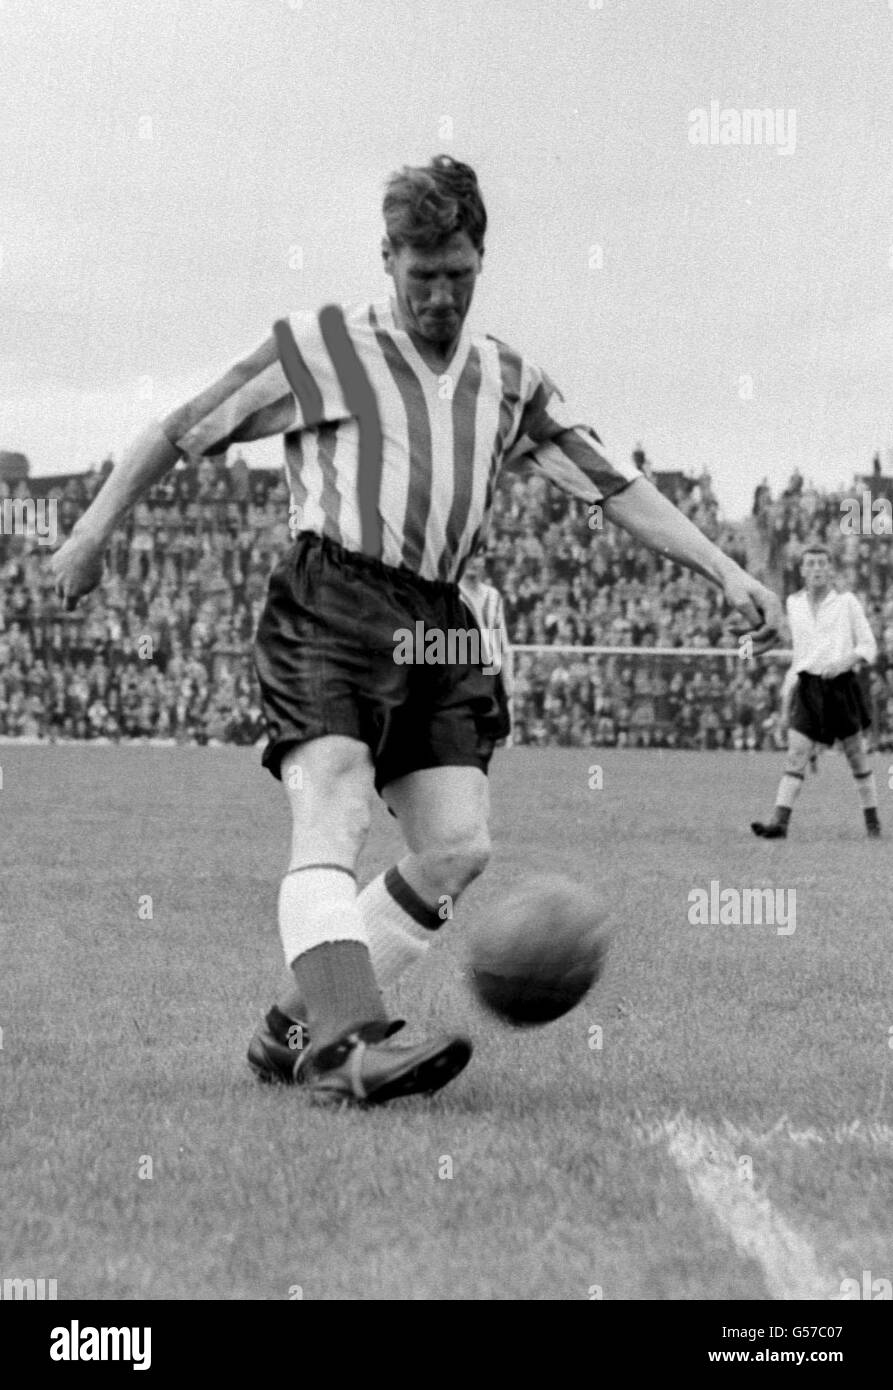 Sunderland forward Len Shackleton in action in 1957. 28/11/00: Shackleton dies aged 78. The former England international, who scored 101 times in 348 appearances for the north-east club, passed away in hospital at around midday. * Shackleton, known as the Clown Prince of Soccer' because of his entertaining skills, suffered a heart attack in August from which he never fully recovered. Stock Photo